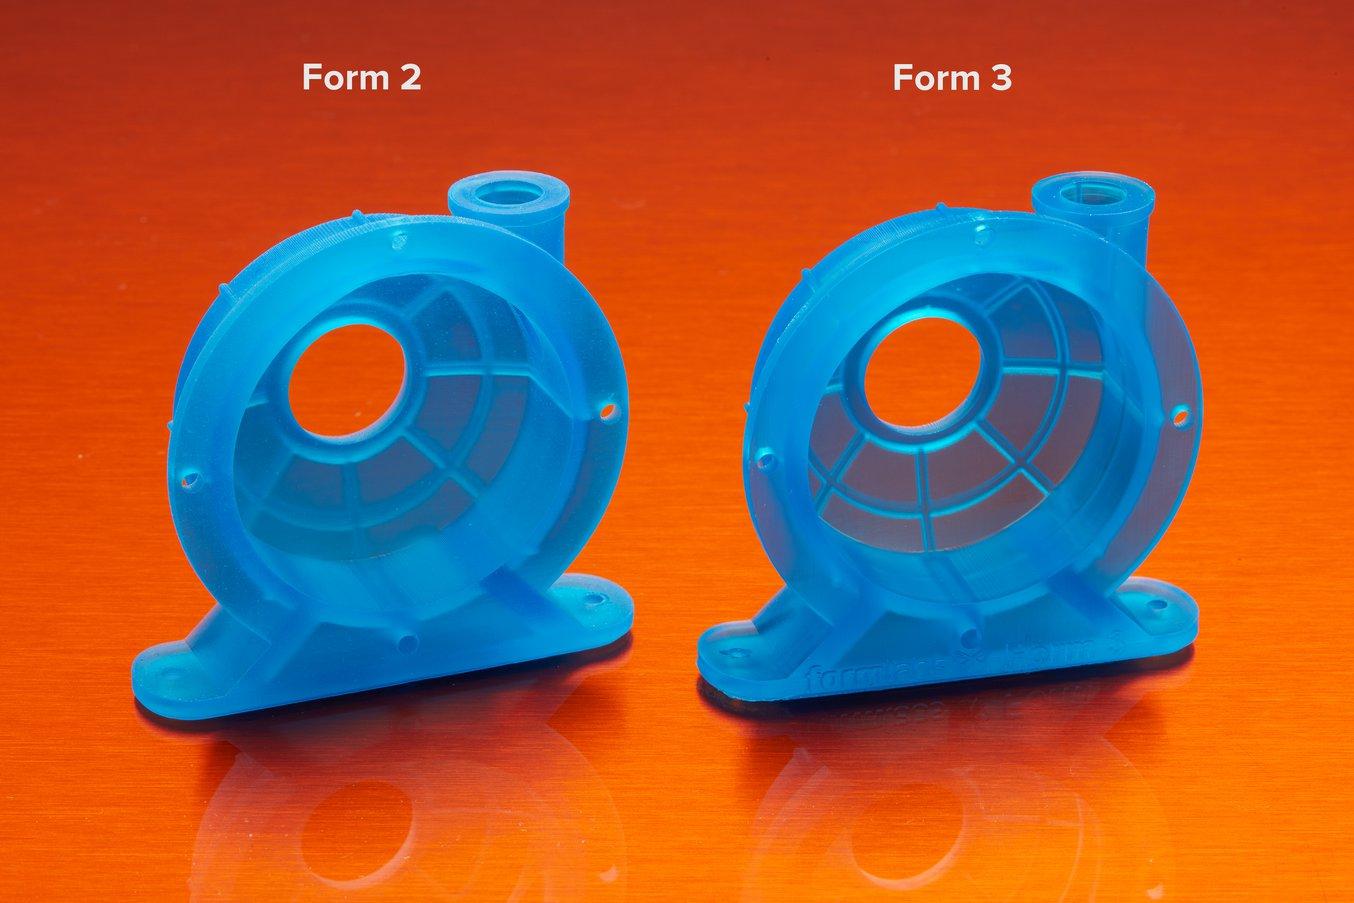 Parts printed on the Form 2 and Form 3